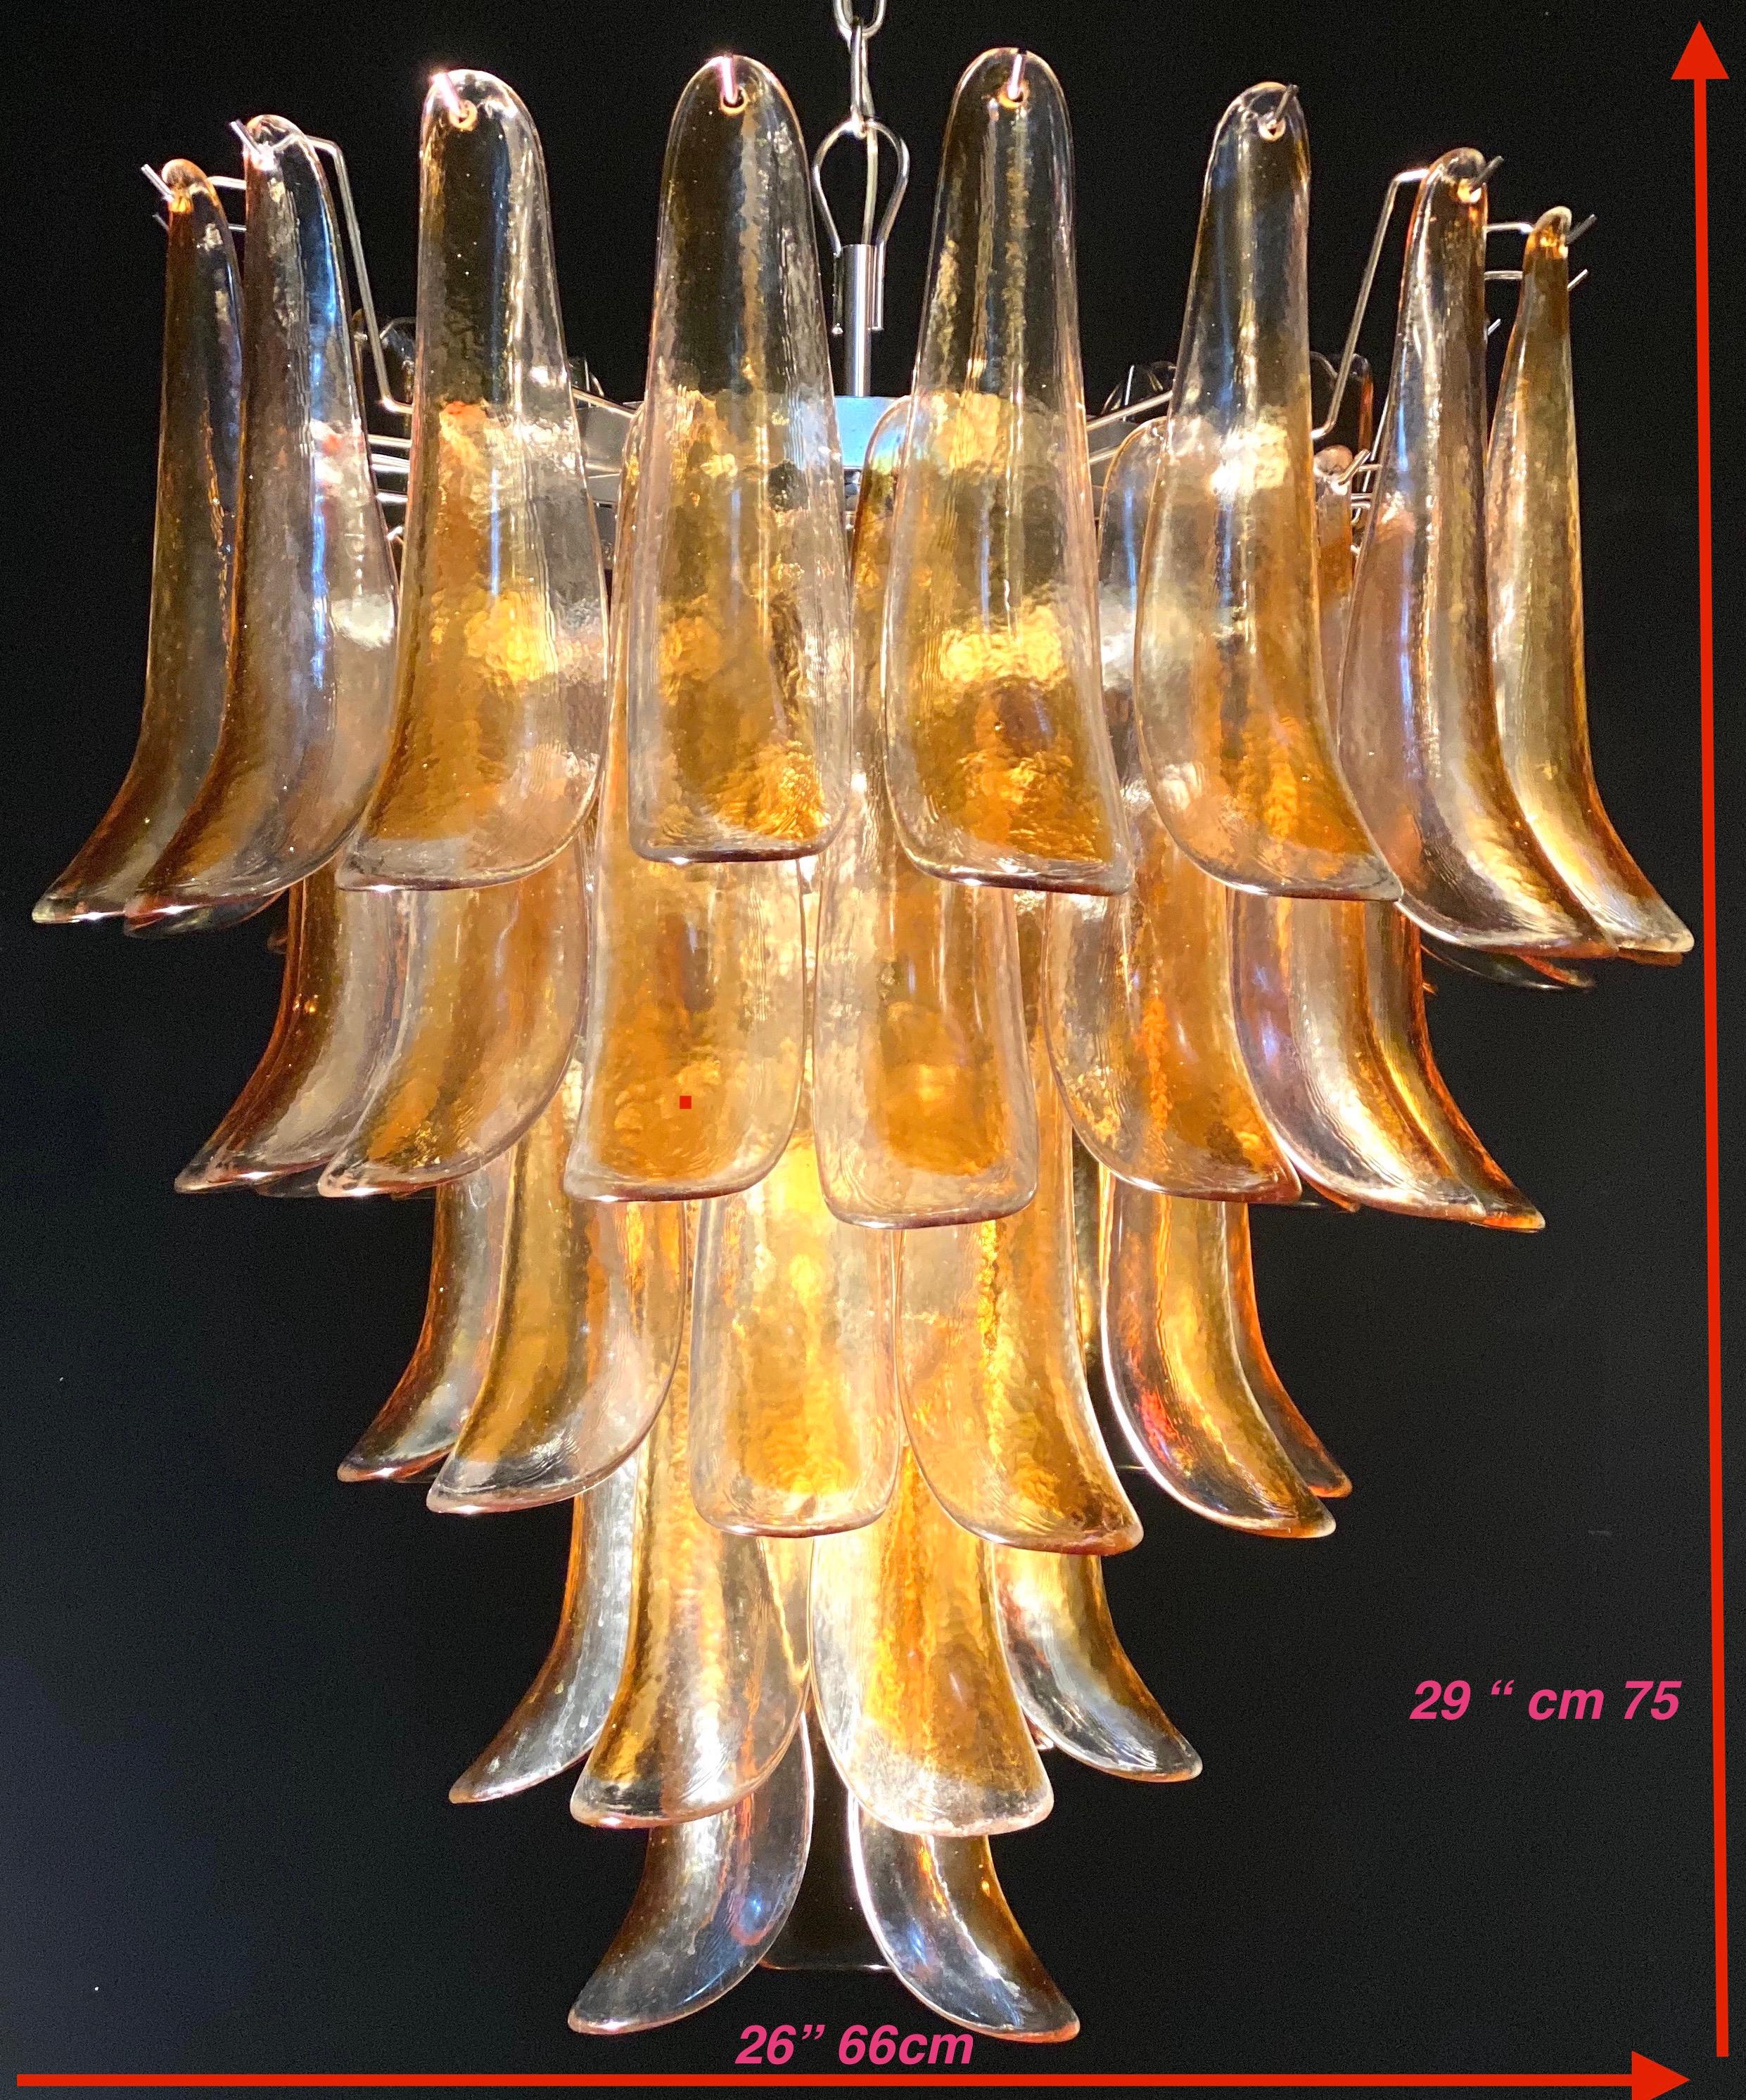 Italian vintage Murano chandelier made by 52 clear amber glass petals supported by a chrome frame.
The clear amber color of the glasses create a fabulous warm light effect.
Period: 1970s
Price is for 1 item 
Dimensions: 55.10 inches (140 cm) height